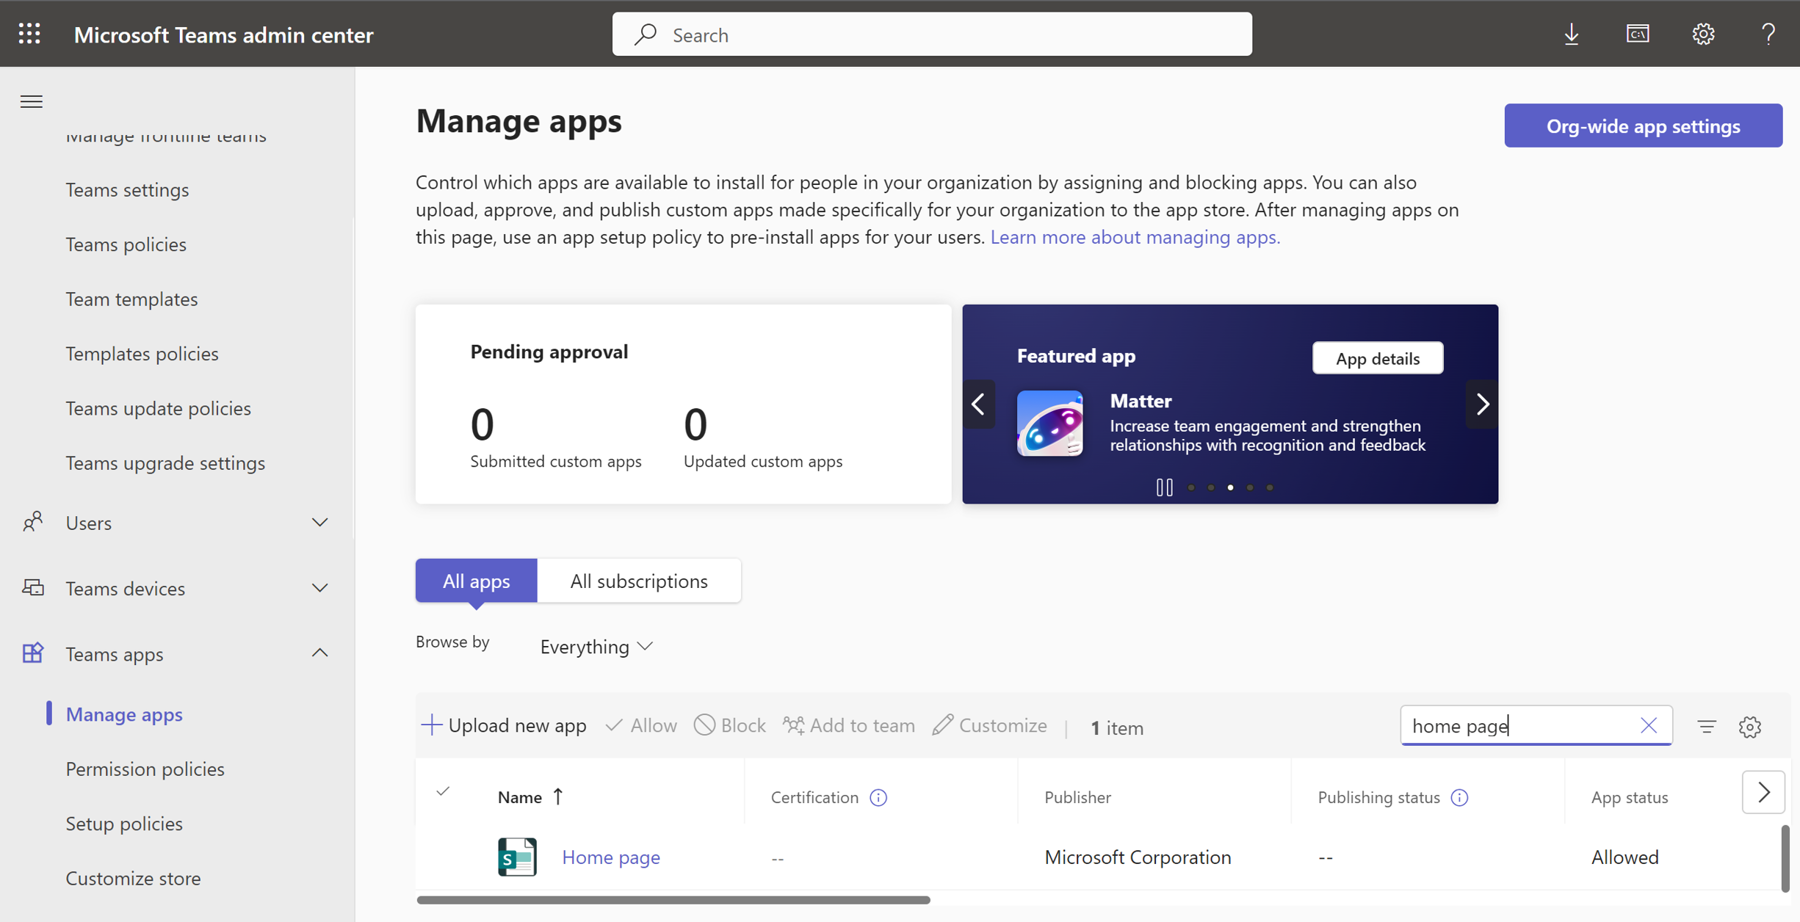 The Manage apps page in the Teams admin center, where apps can be allowed, blocked, added to certain teams or otherwise customized. The user has searched for the Home Page app, which is set to Allowed.